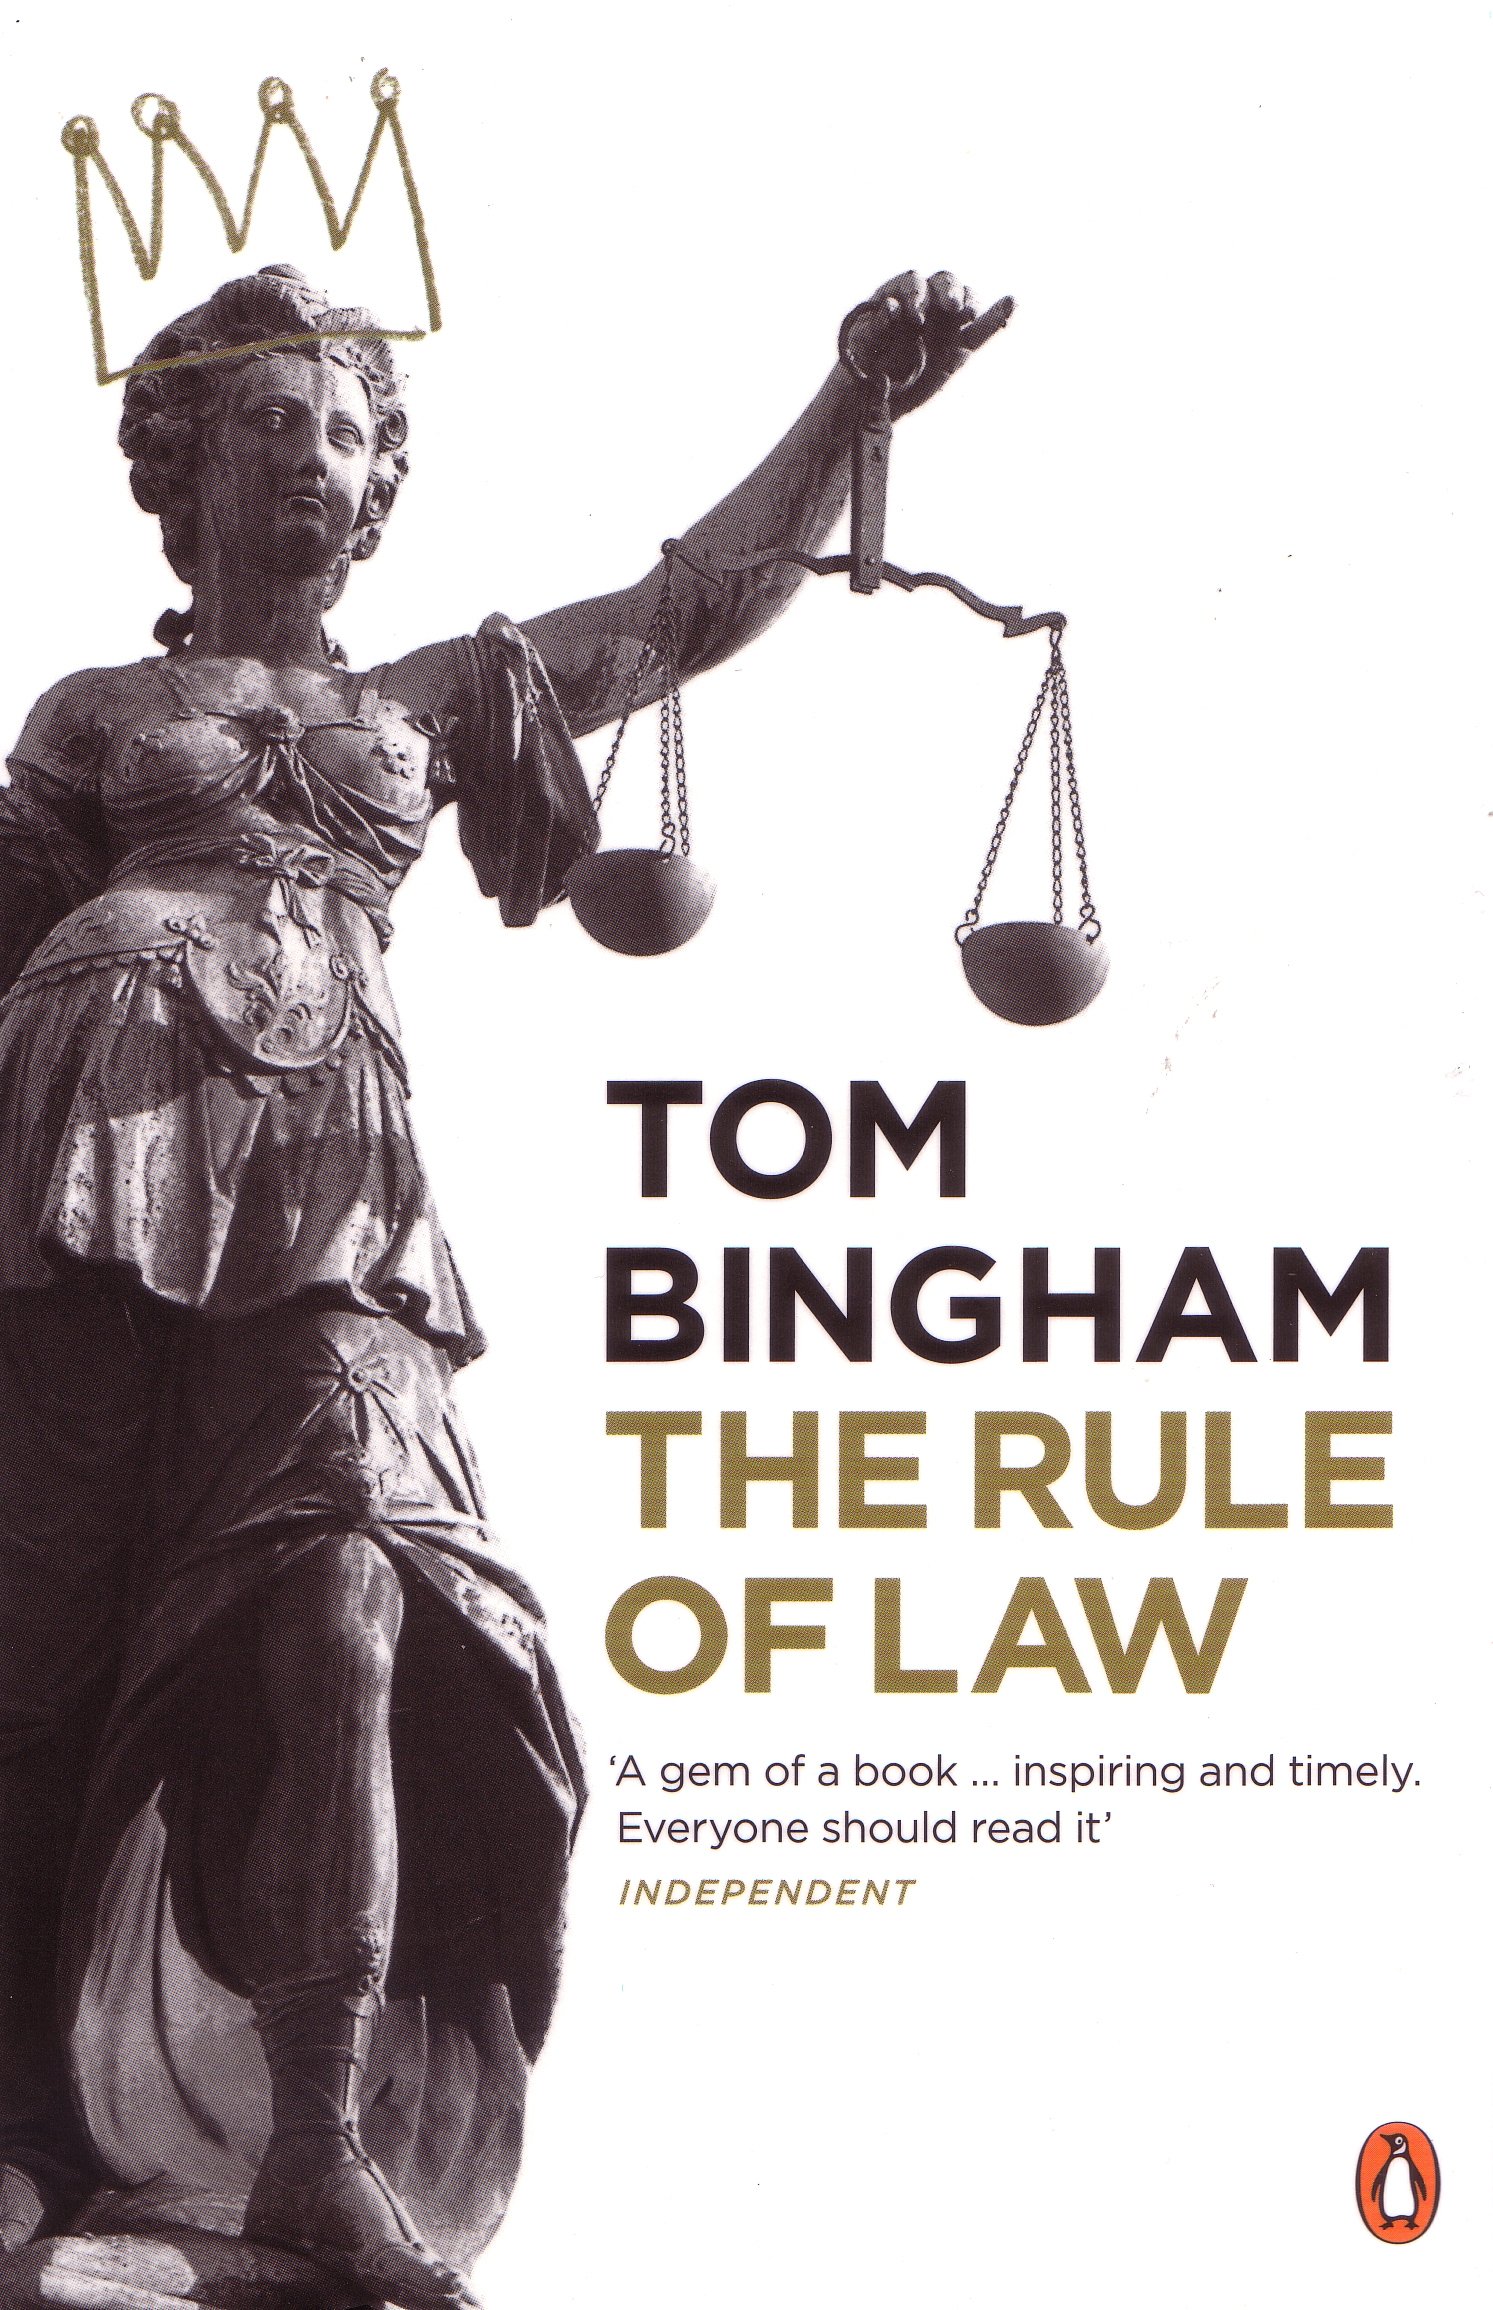 The Rule of Law by Tom Bingham (Book Review)